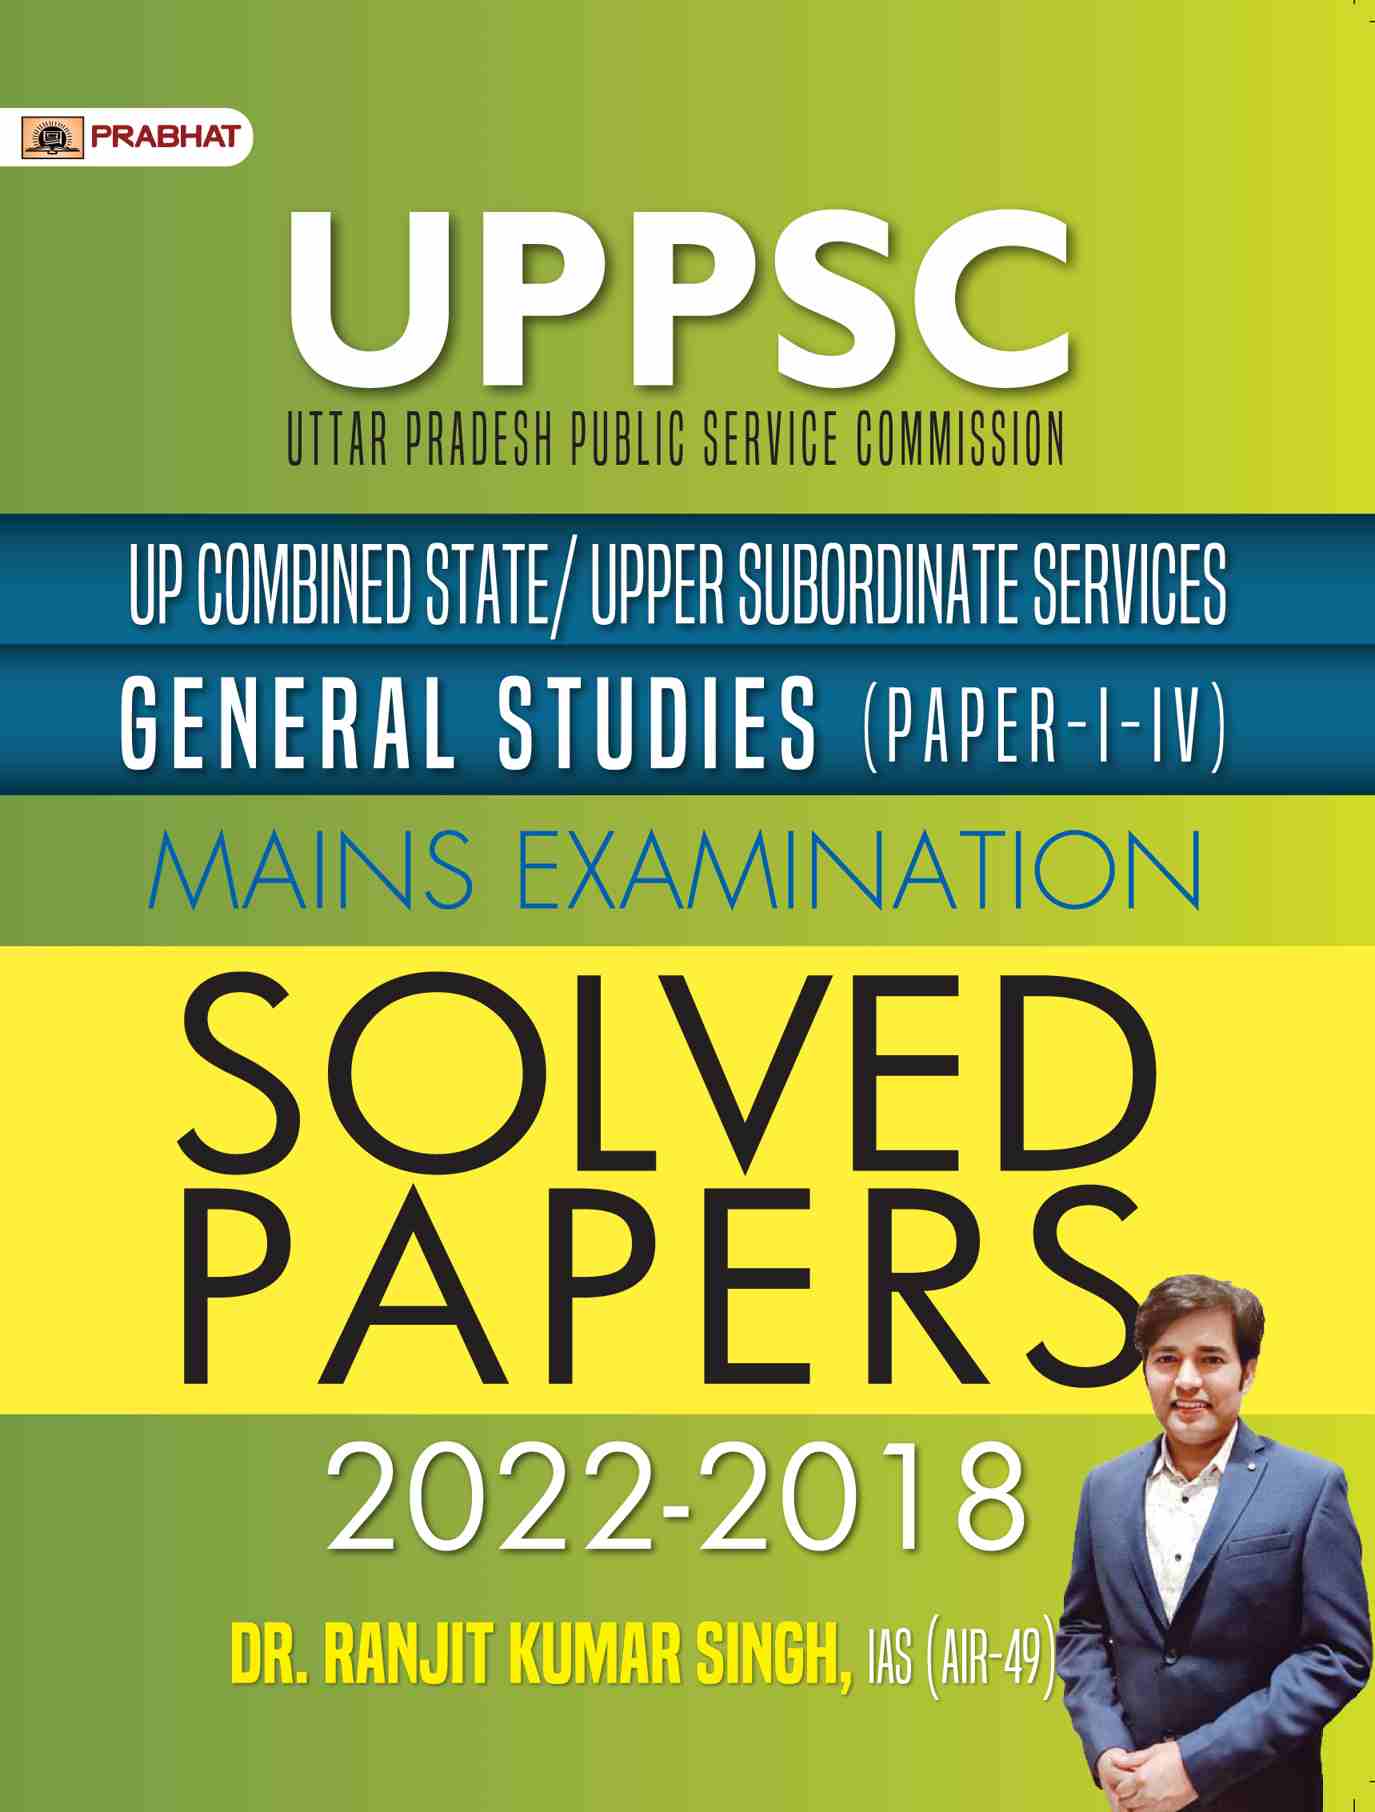 UPPSC Uttar Pradesh Public Service Commission UP Combined State/Upper Subordinate Services General Studies (GS Paper I–IV) Mains Examination Solved Papers 2022-2018 